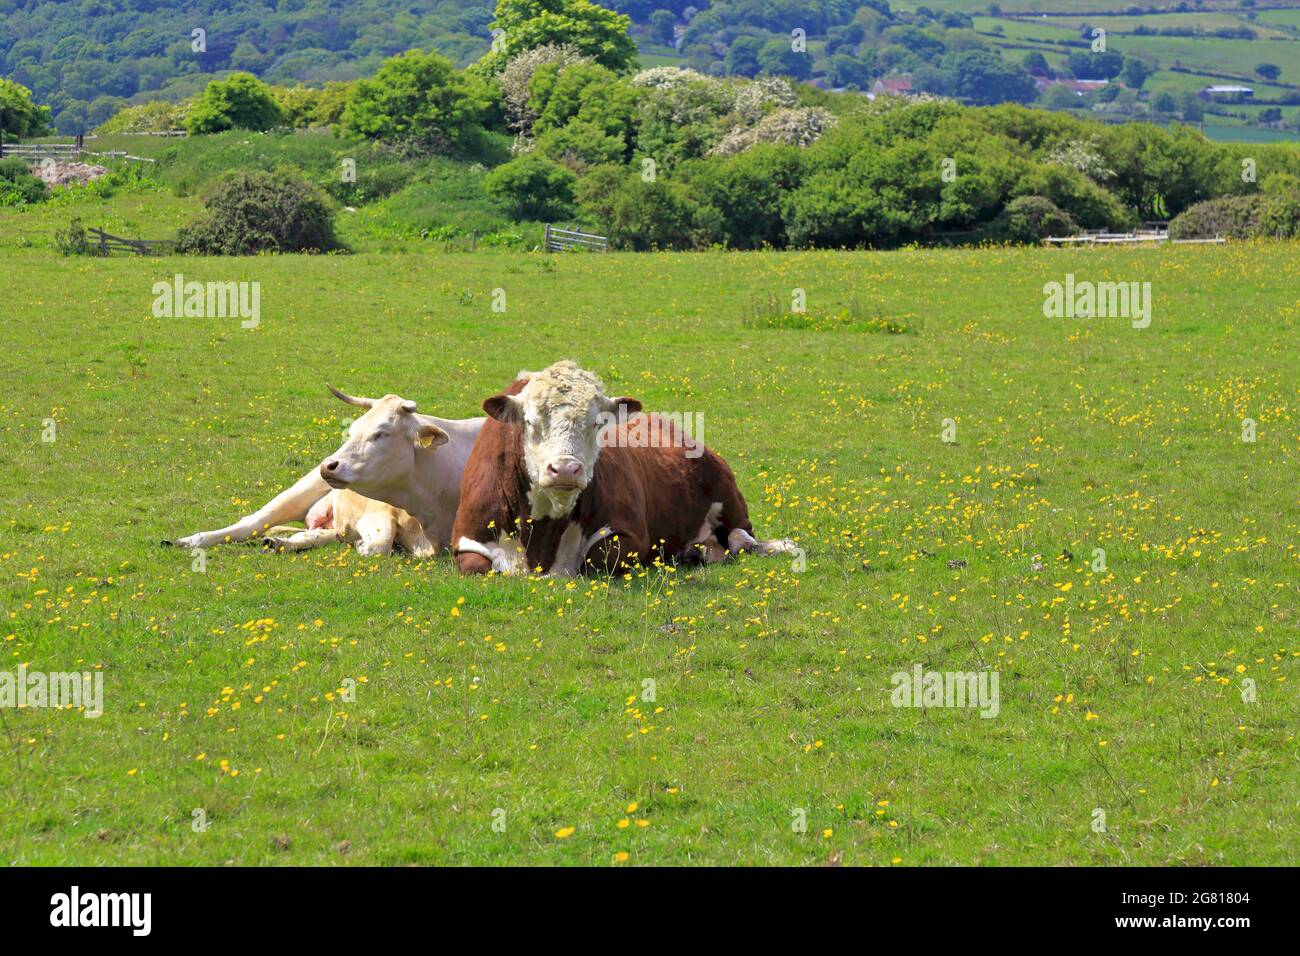 White cow and Hereford bull laid in a field on the Cleveland Way near Robin Hoods Bay, North Yorkshire, North Yorks Moors National Park, England, UK. Stock Photo